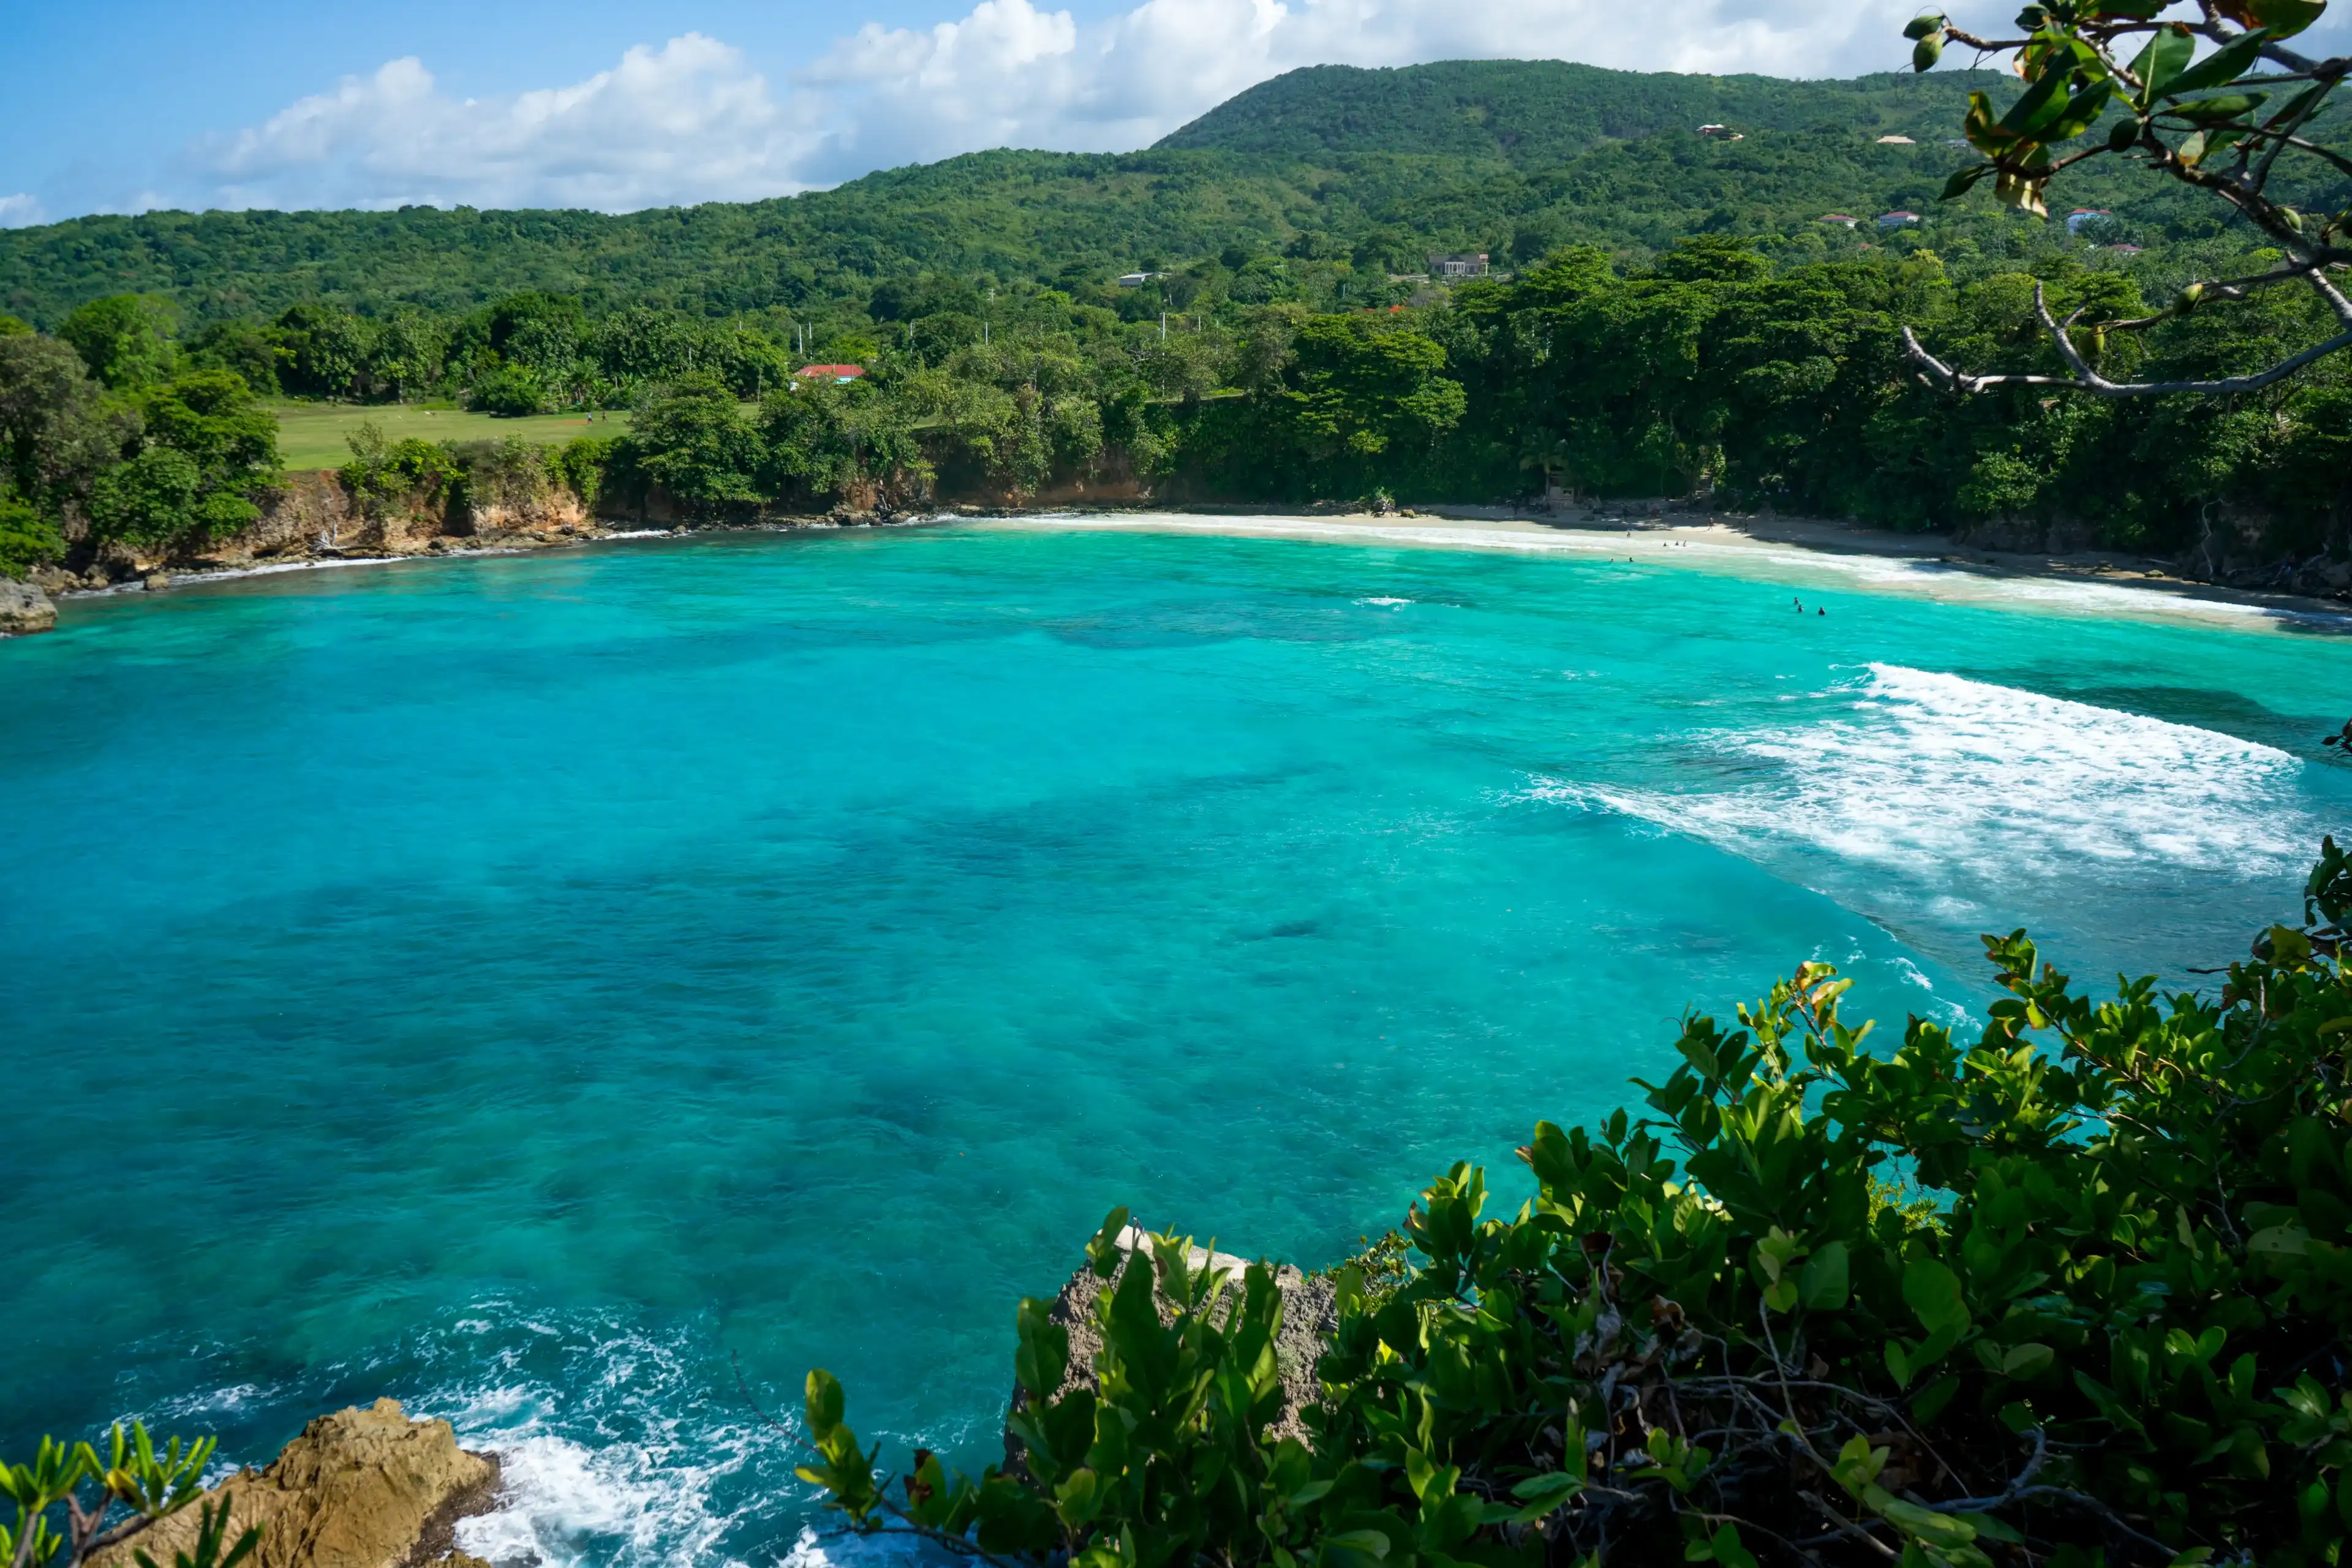 Views of the coastline and bays with turquoise water from the cliffs in Jamaica Portland